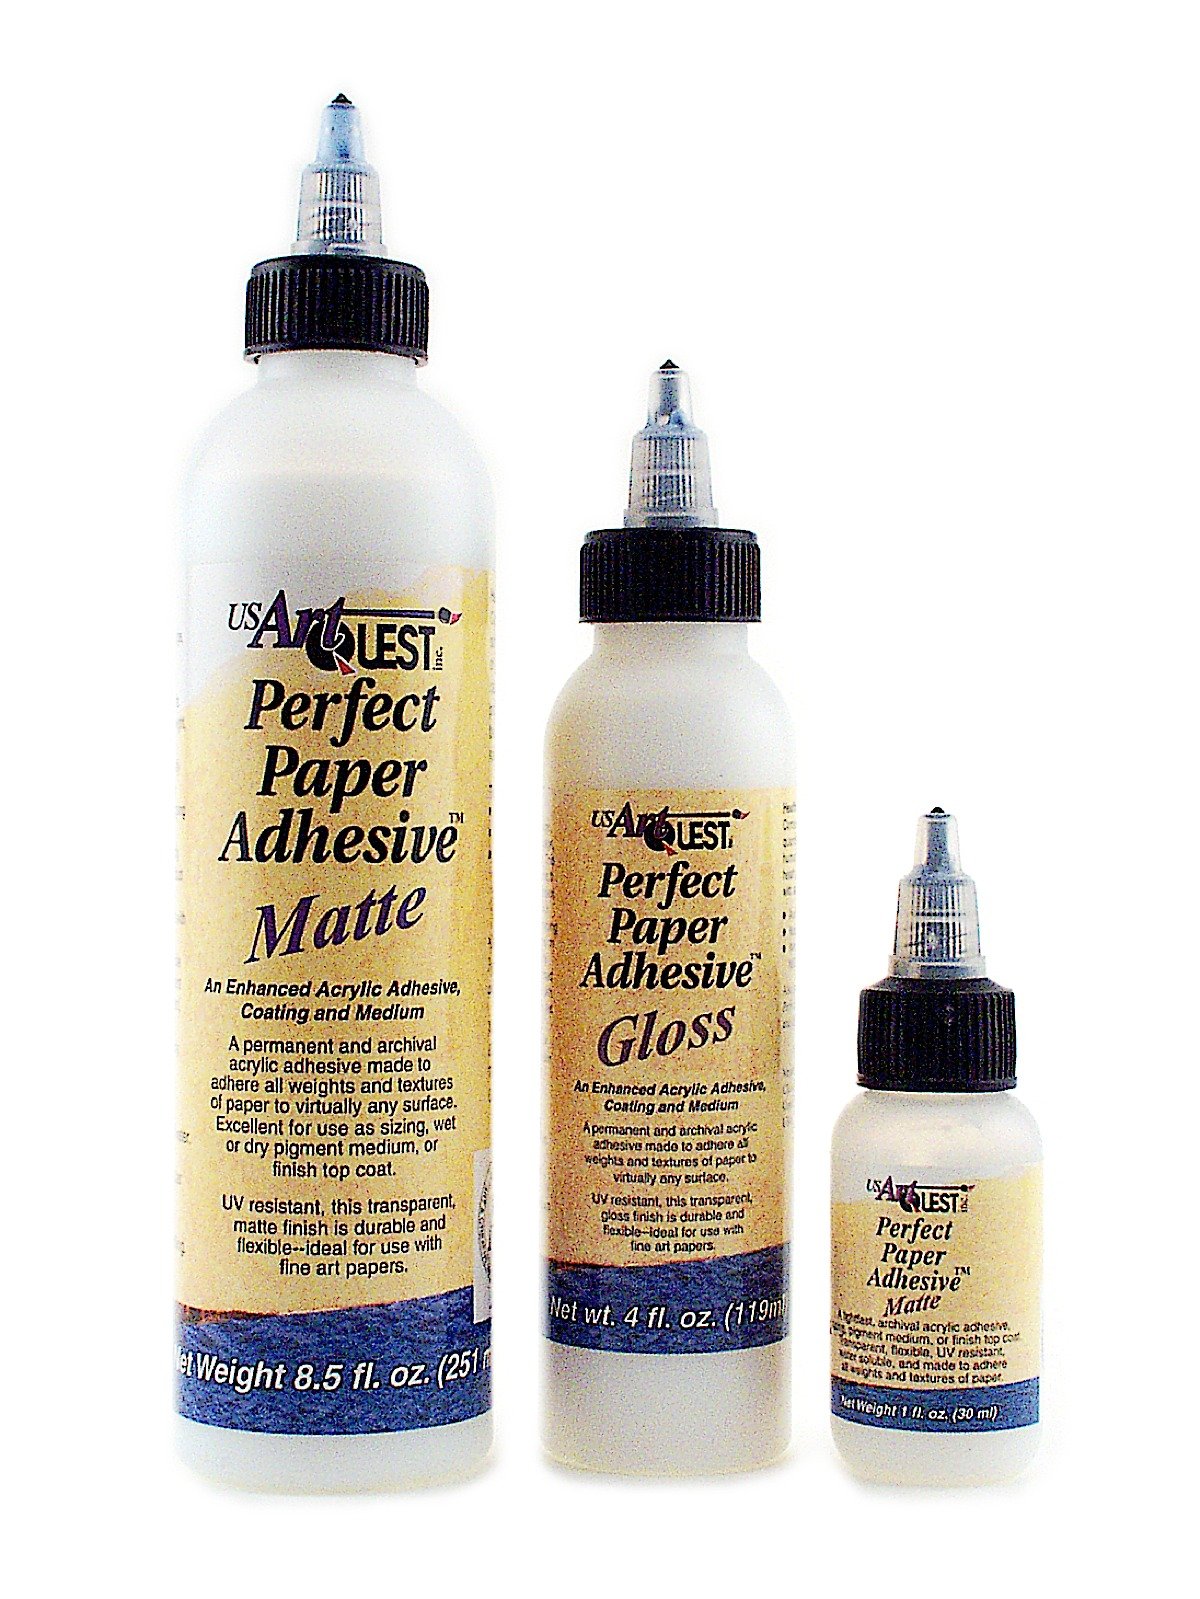 US Art Quest - Perfect Paper Adhesive